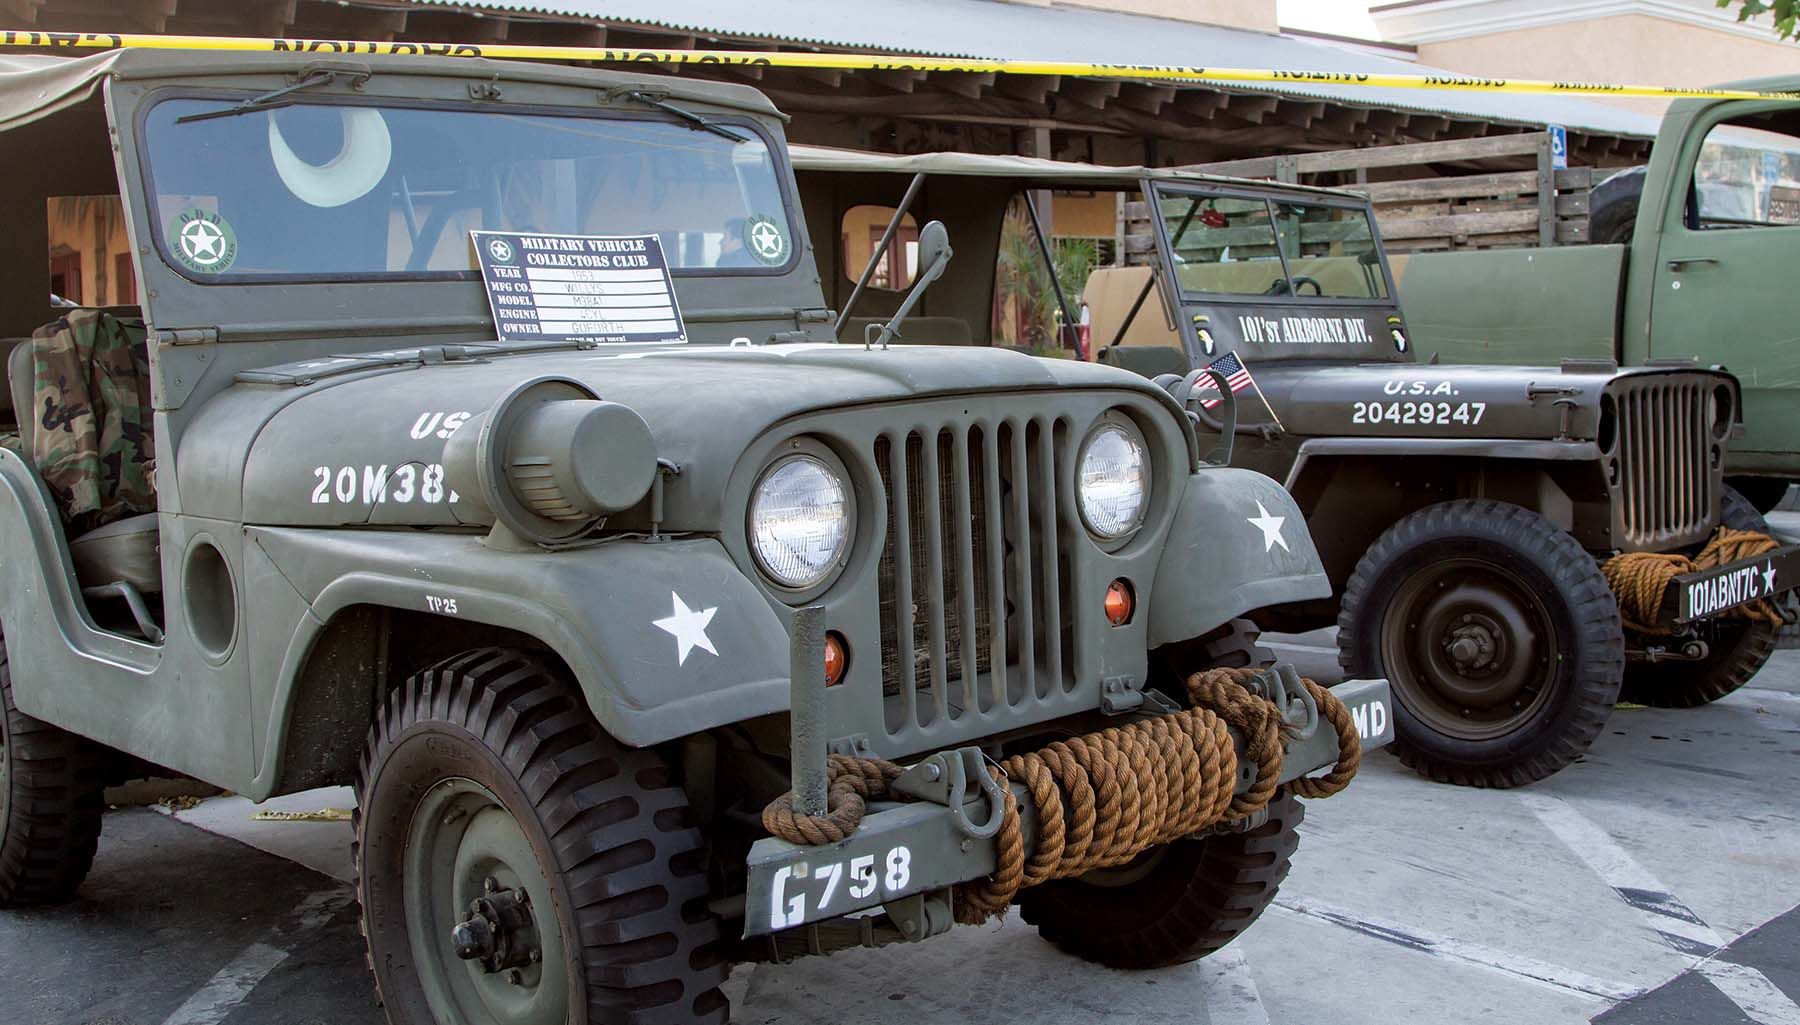 The jeep at 75: See vintage models and win a new one